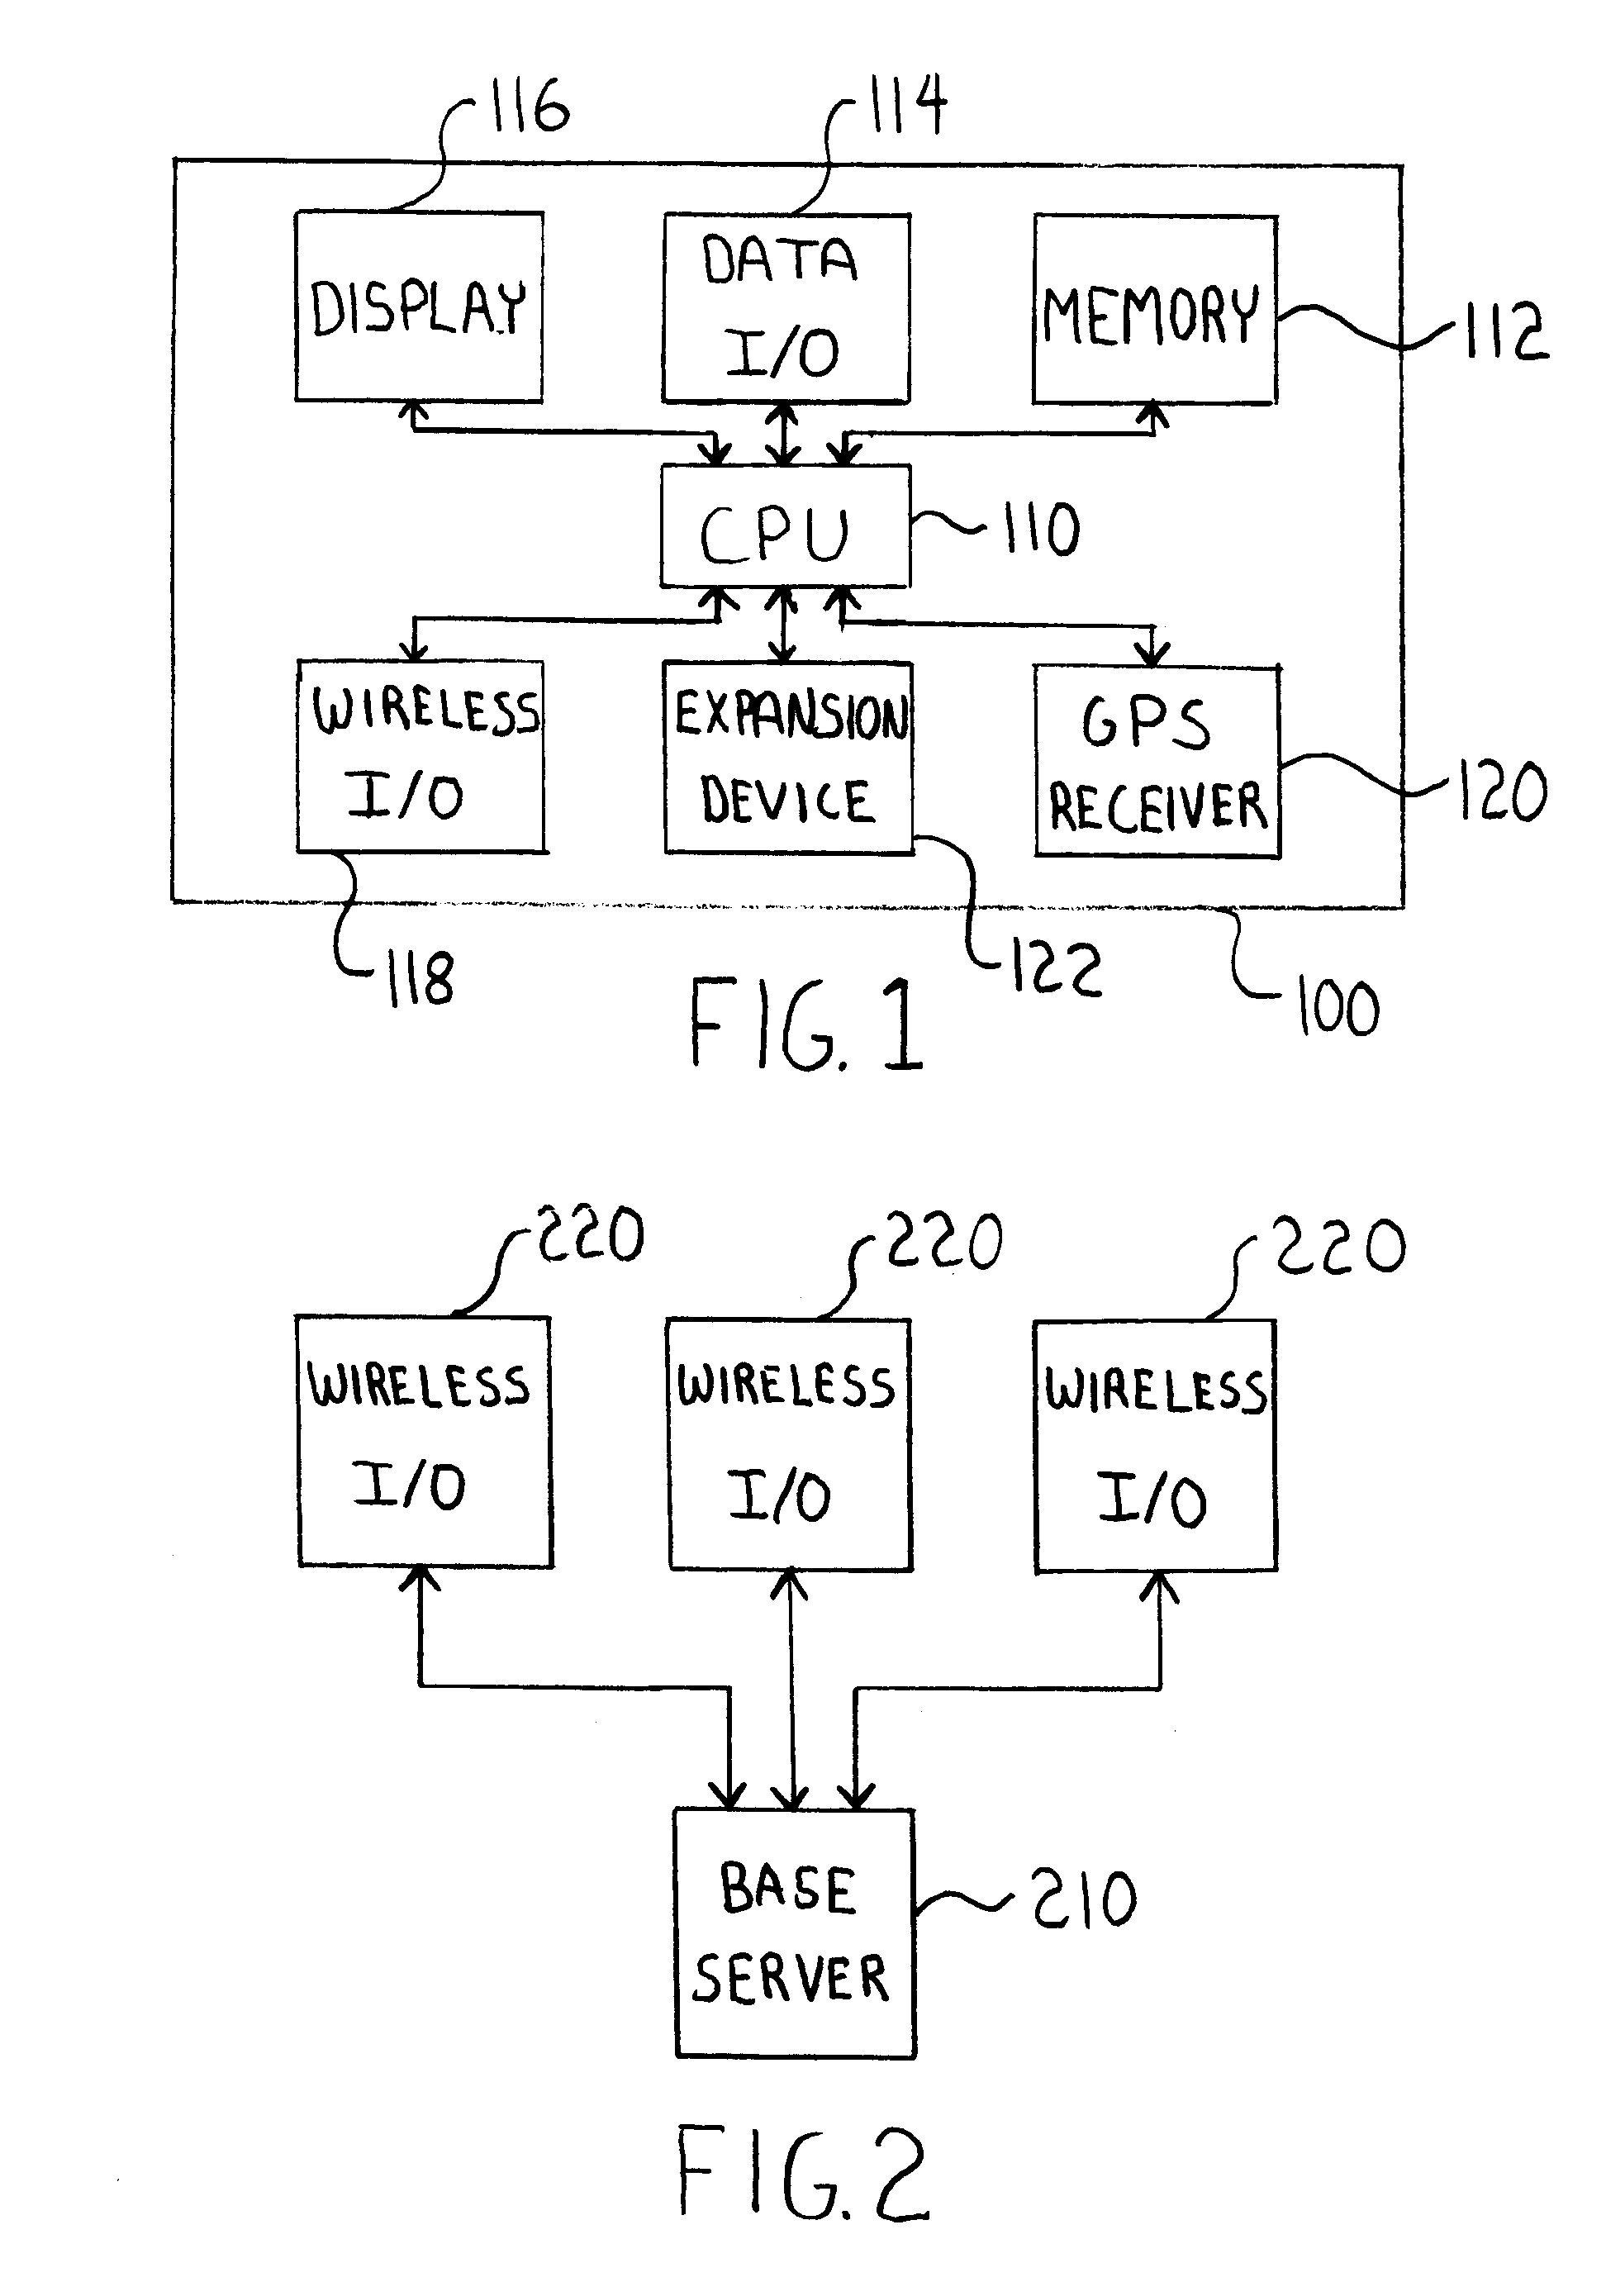 List-based selection system and methods for using the same